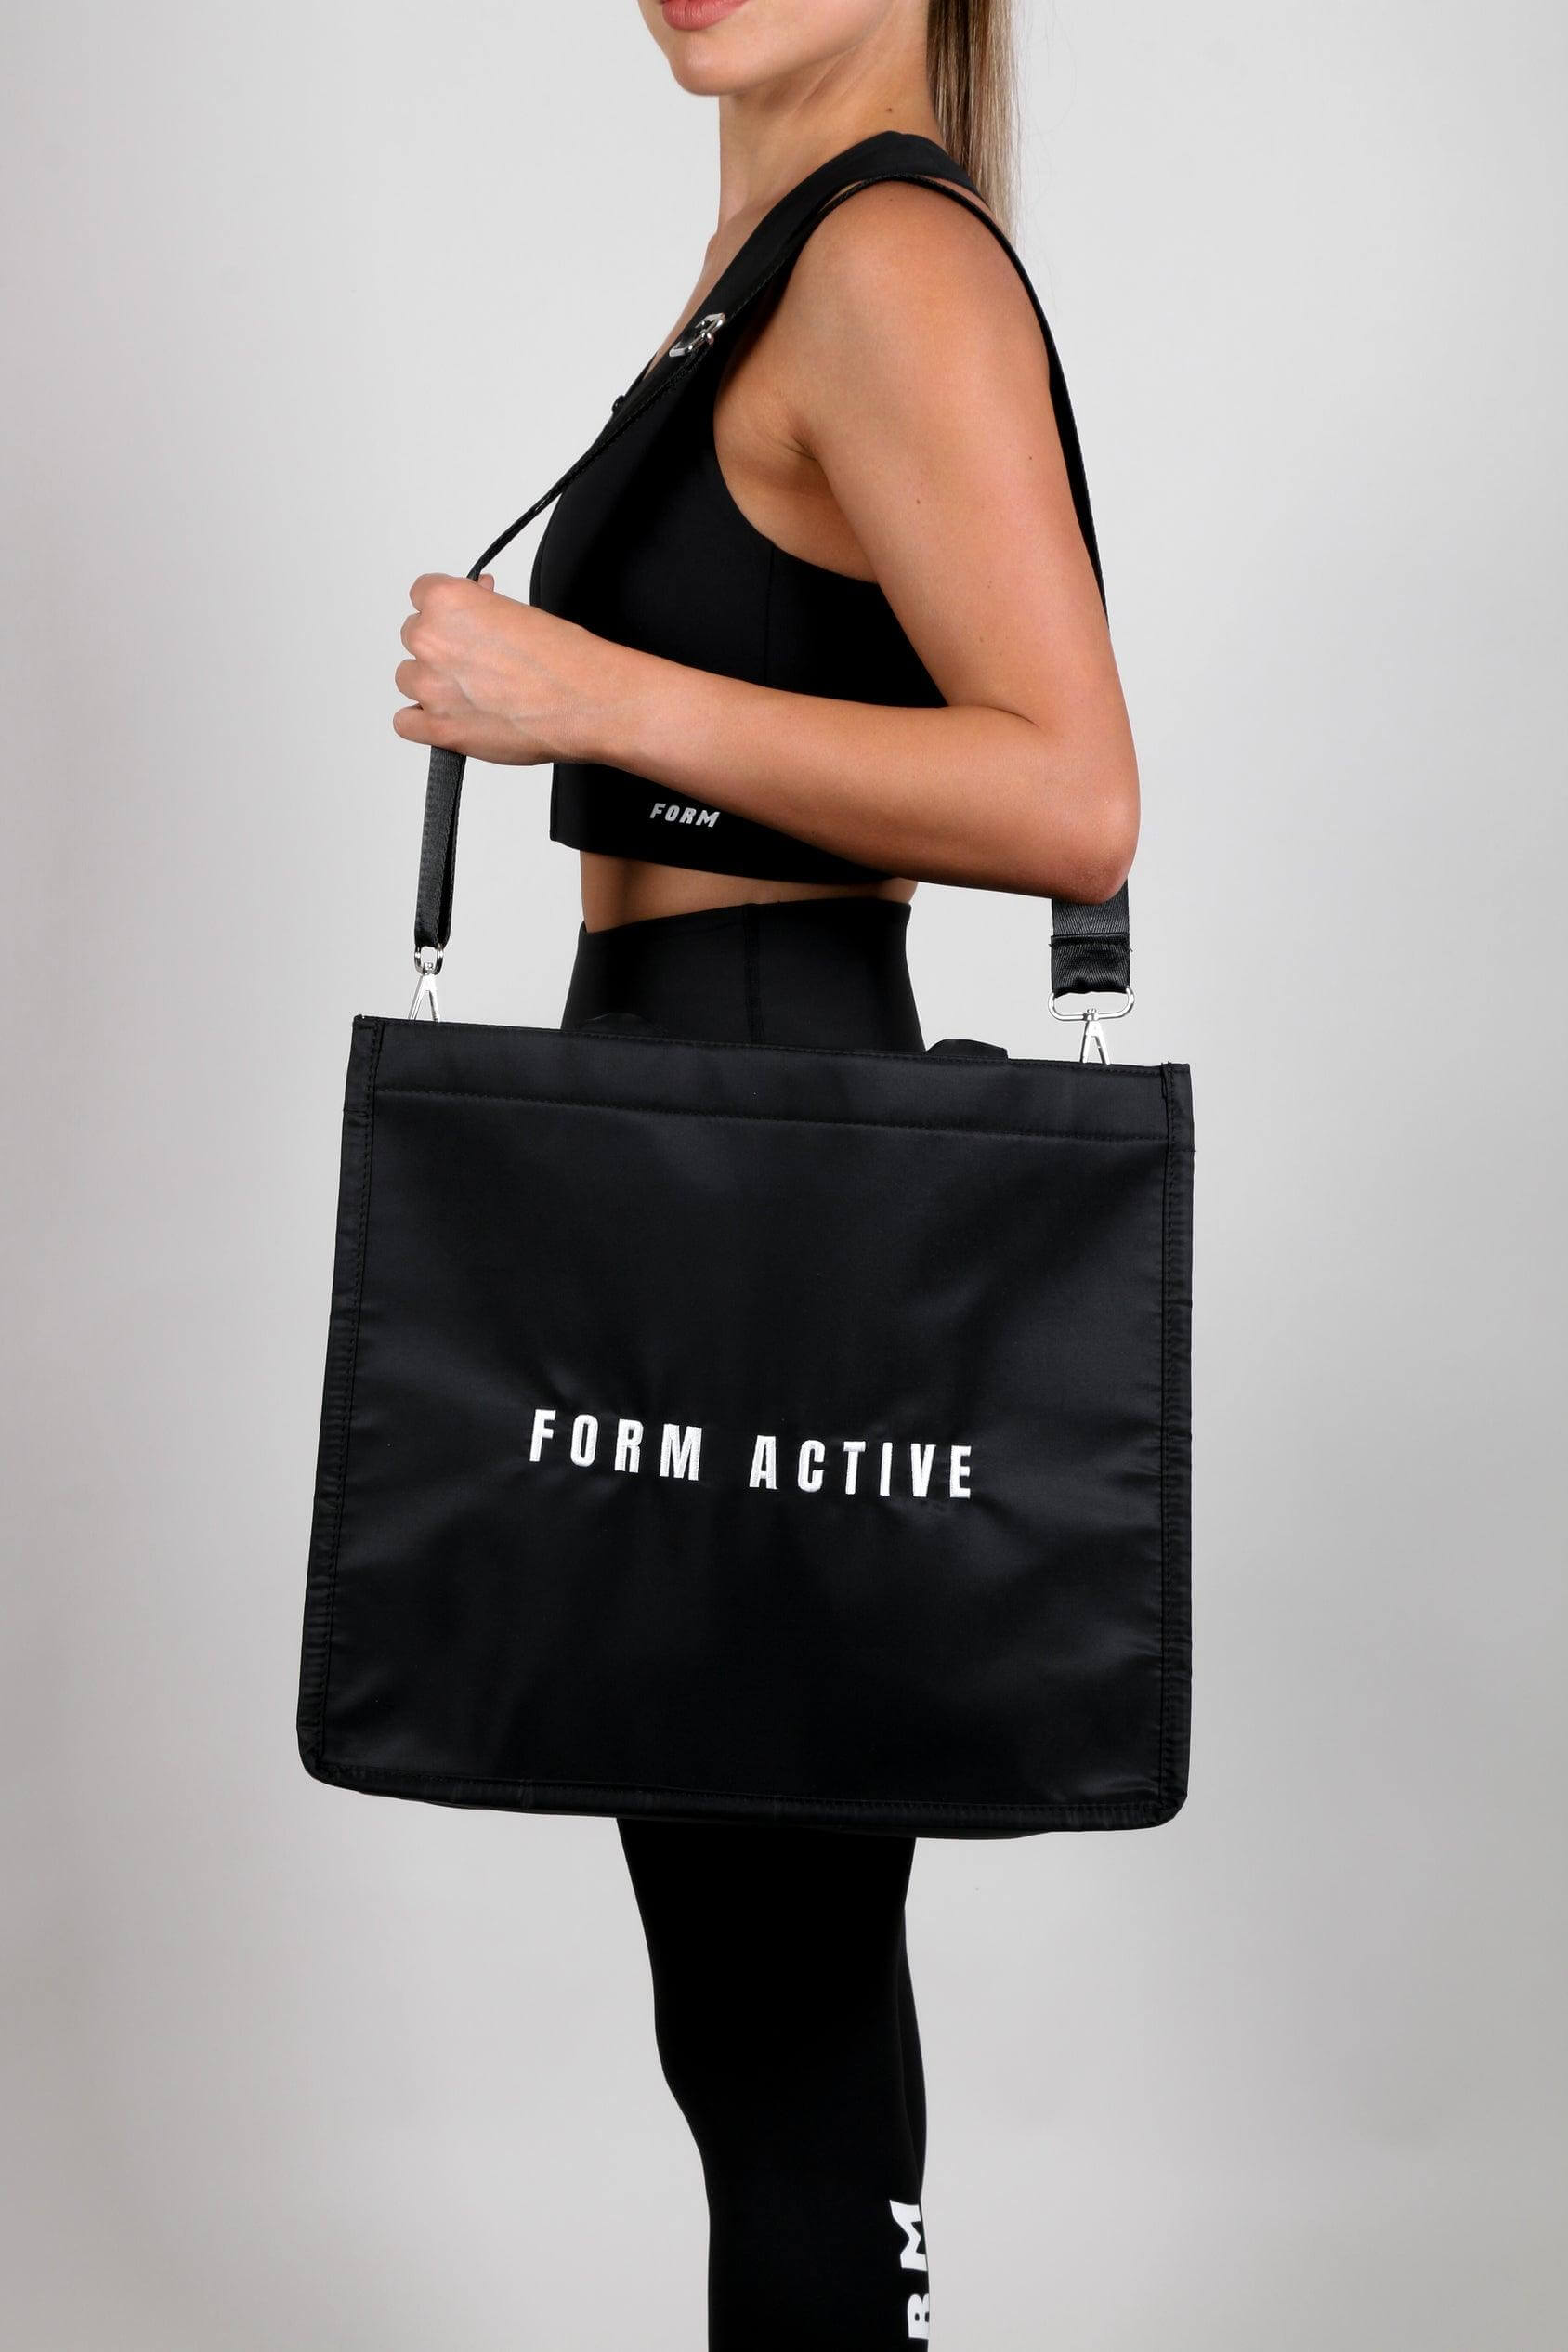 FORM ACTIVE TOTE BAG